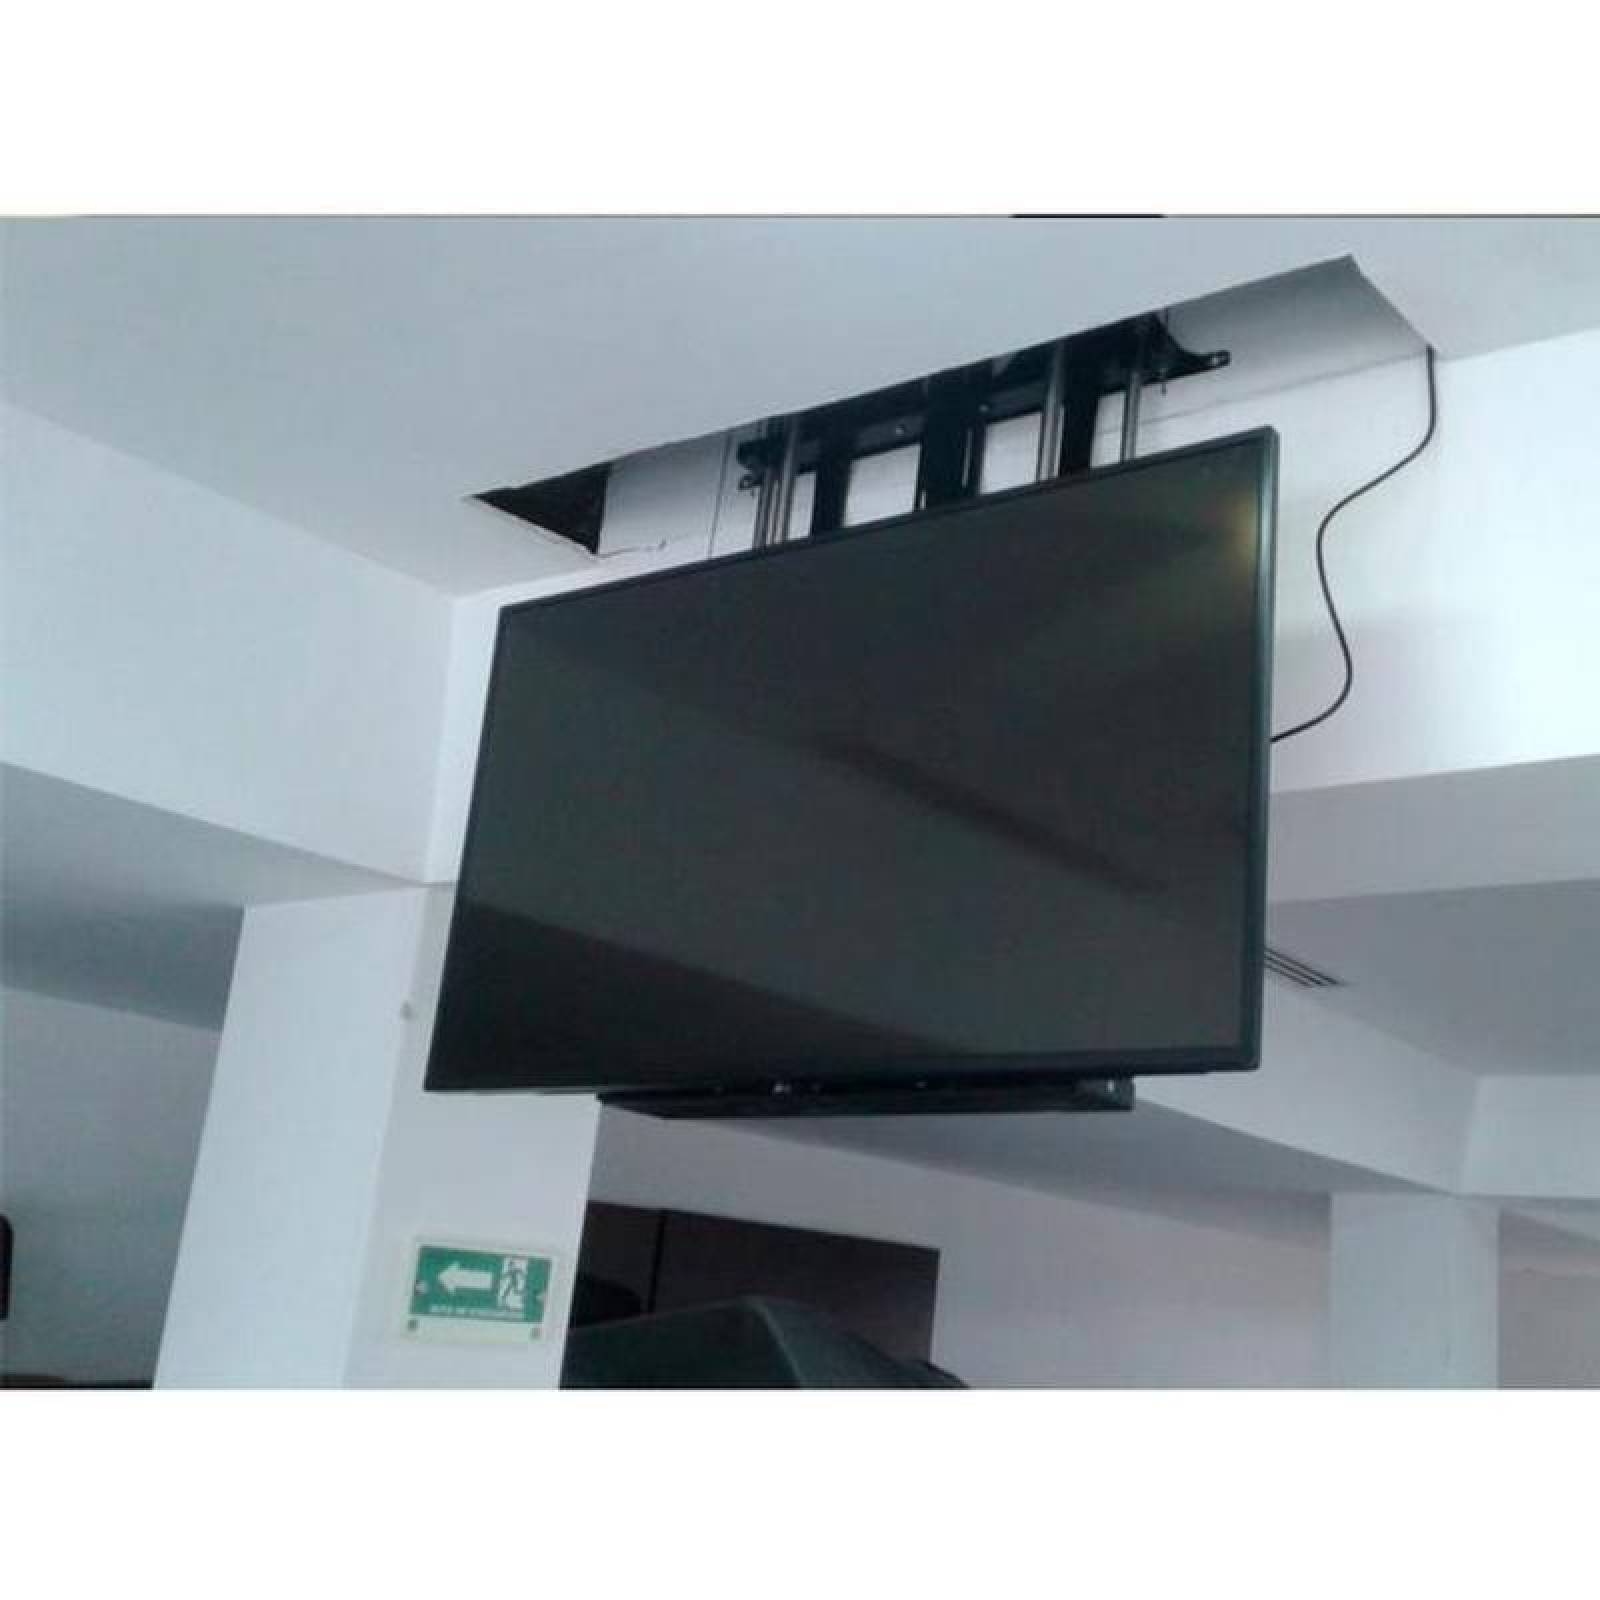 Soporte Pie Tv Lcd Led Smart Tv Inclinable Regulable 23 A 70